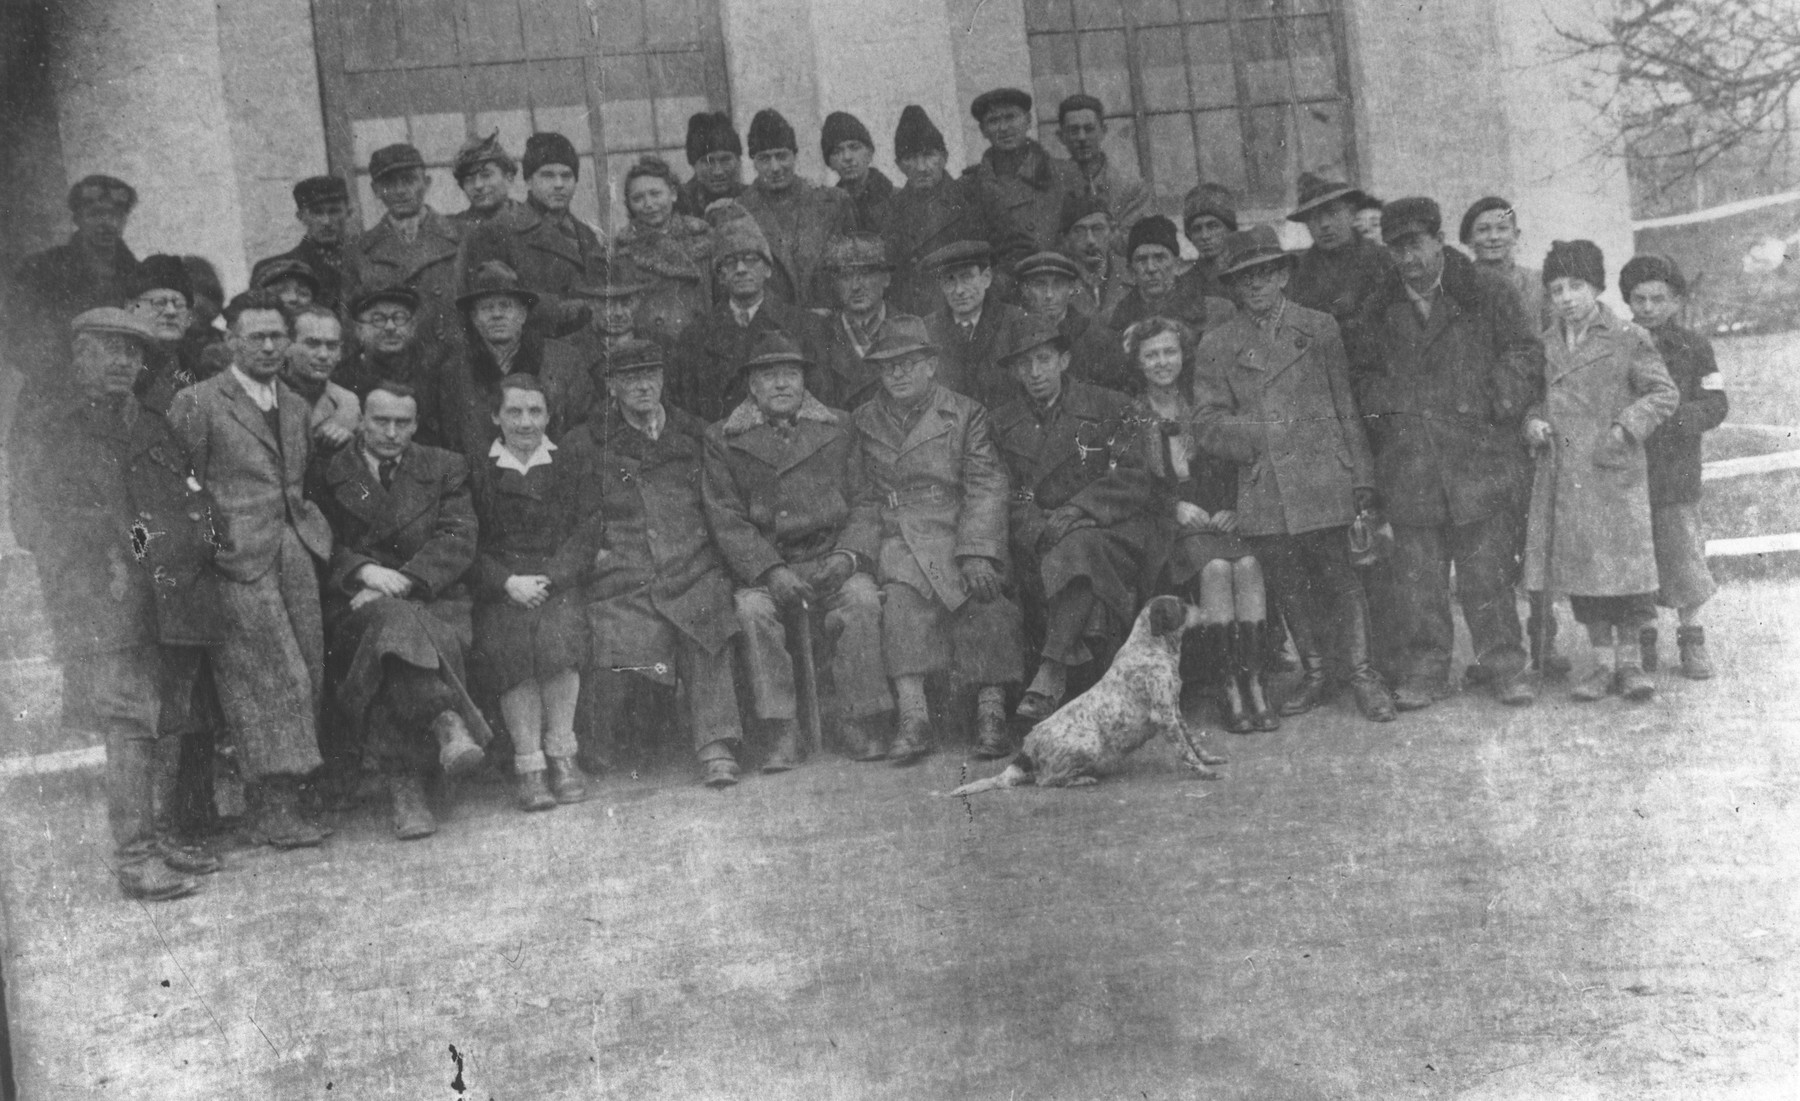 Group portrait of Jewish forced laborers at the Turnatoria, the machine shop established by Siegfried Jagendorf in the Mogilev-Podolskiy foundry.

Shaul Weinstock and  his mother, Lina Weinstock. have been tentatively identified in the first row, on the left.